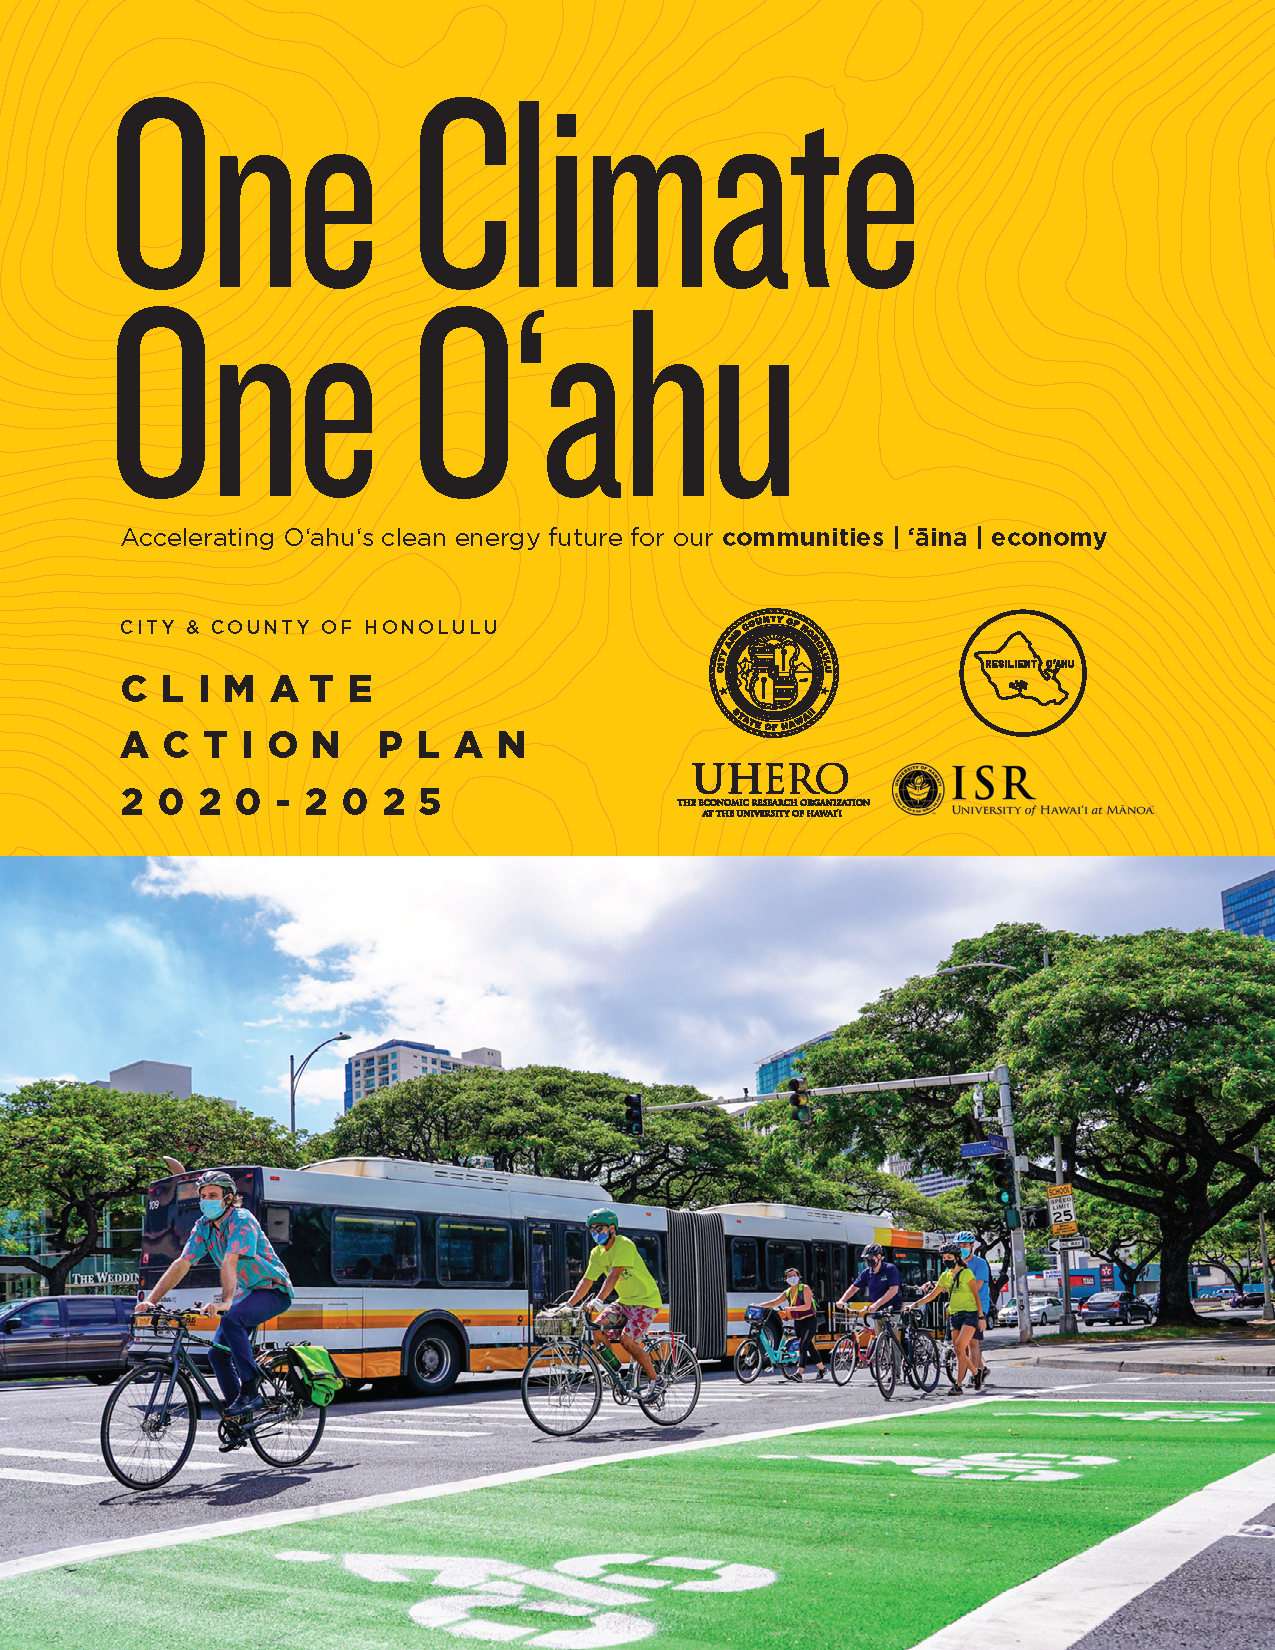 Are We Hitting Our Targets? A Look at Hawai'i's GHG Emissions - UHERO